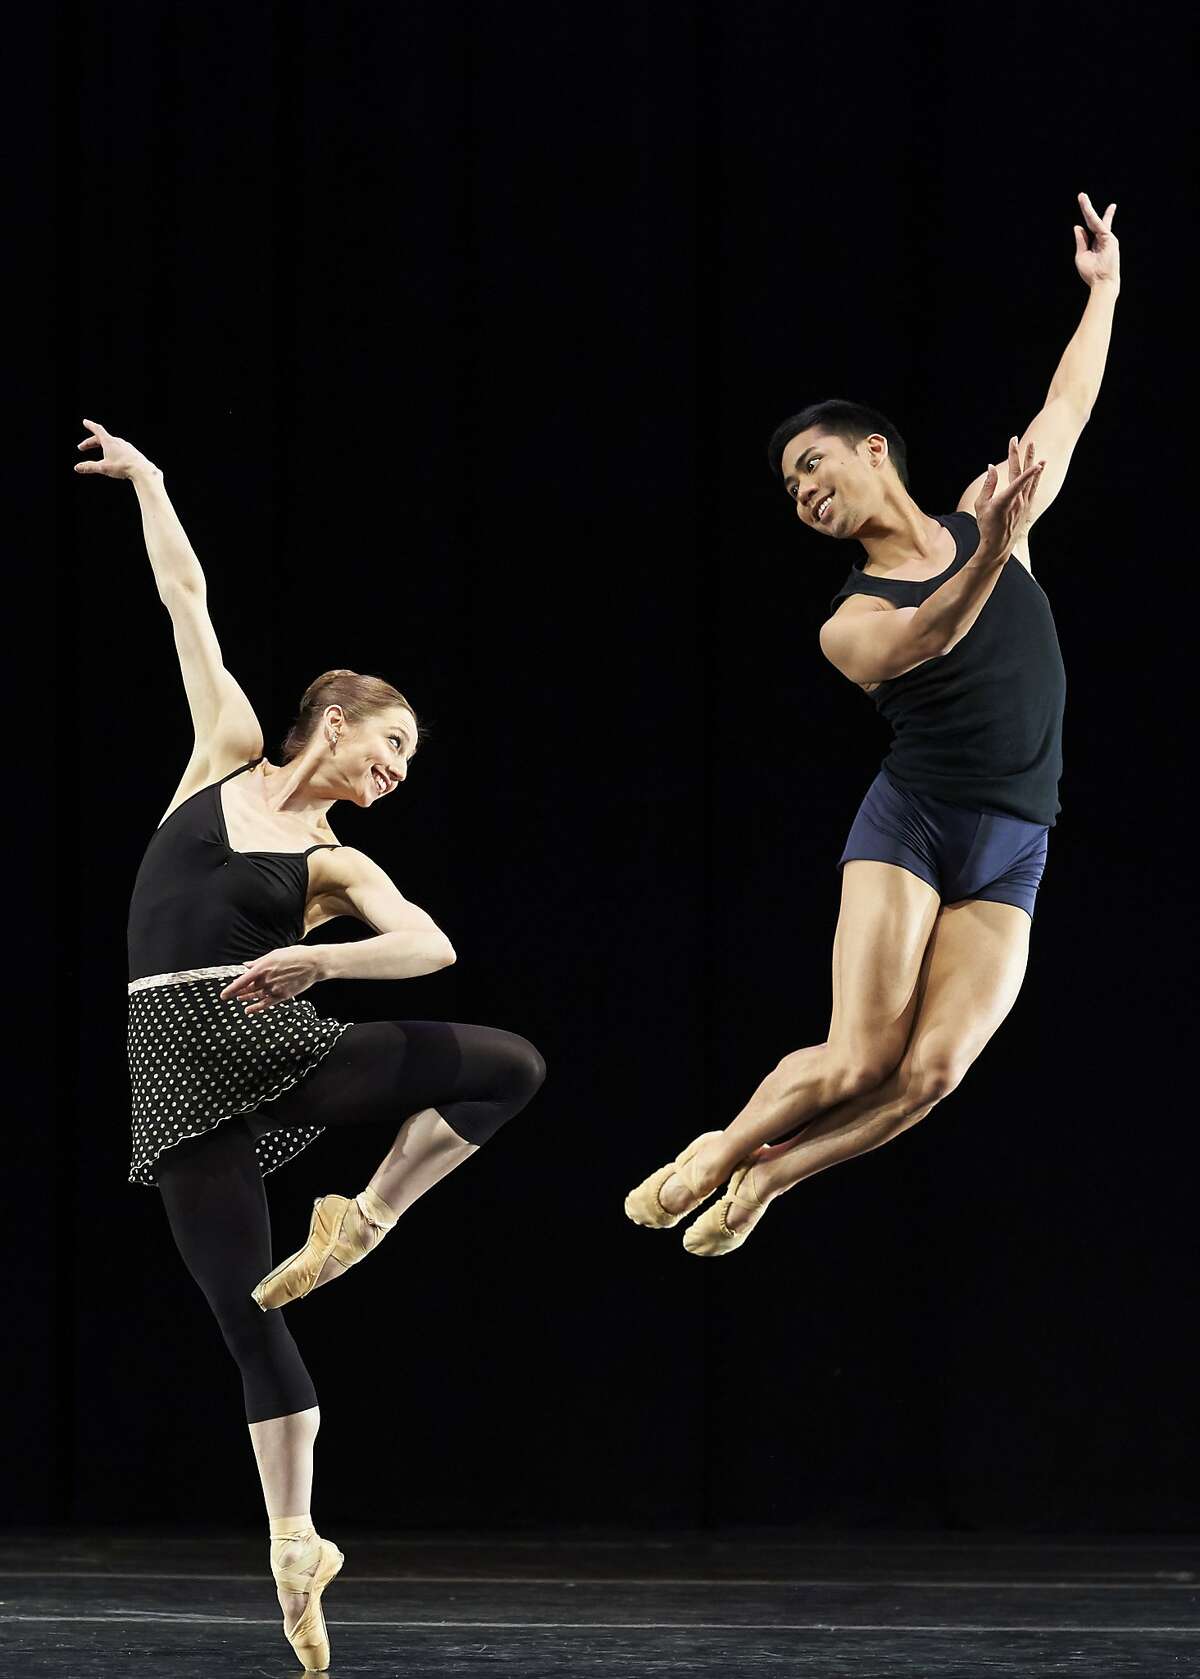 caption The Oakland Ballet's Sharon Wehner and Sean Omandum in the premiere of Val Caniparoli's "Das Ballett," part of the Oakland Ballet's 50th anniversary program at the Paramount Theater Saturday, May 23. Photo by David deSilva